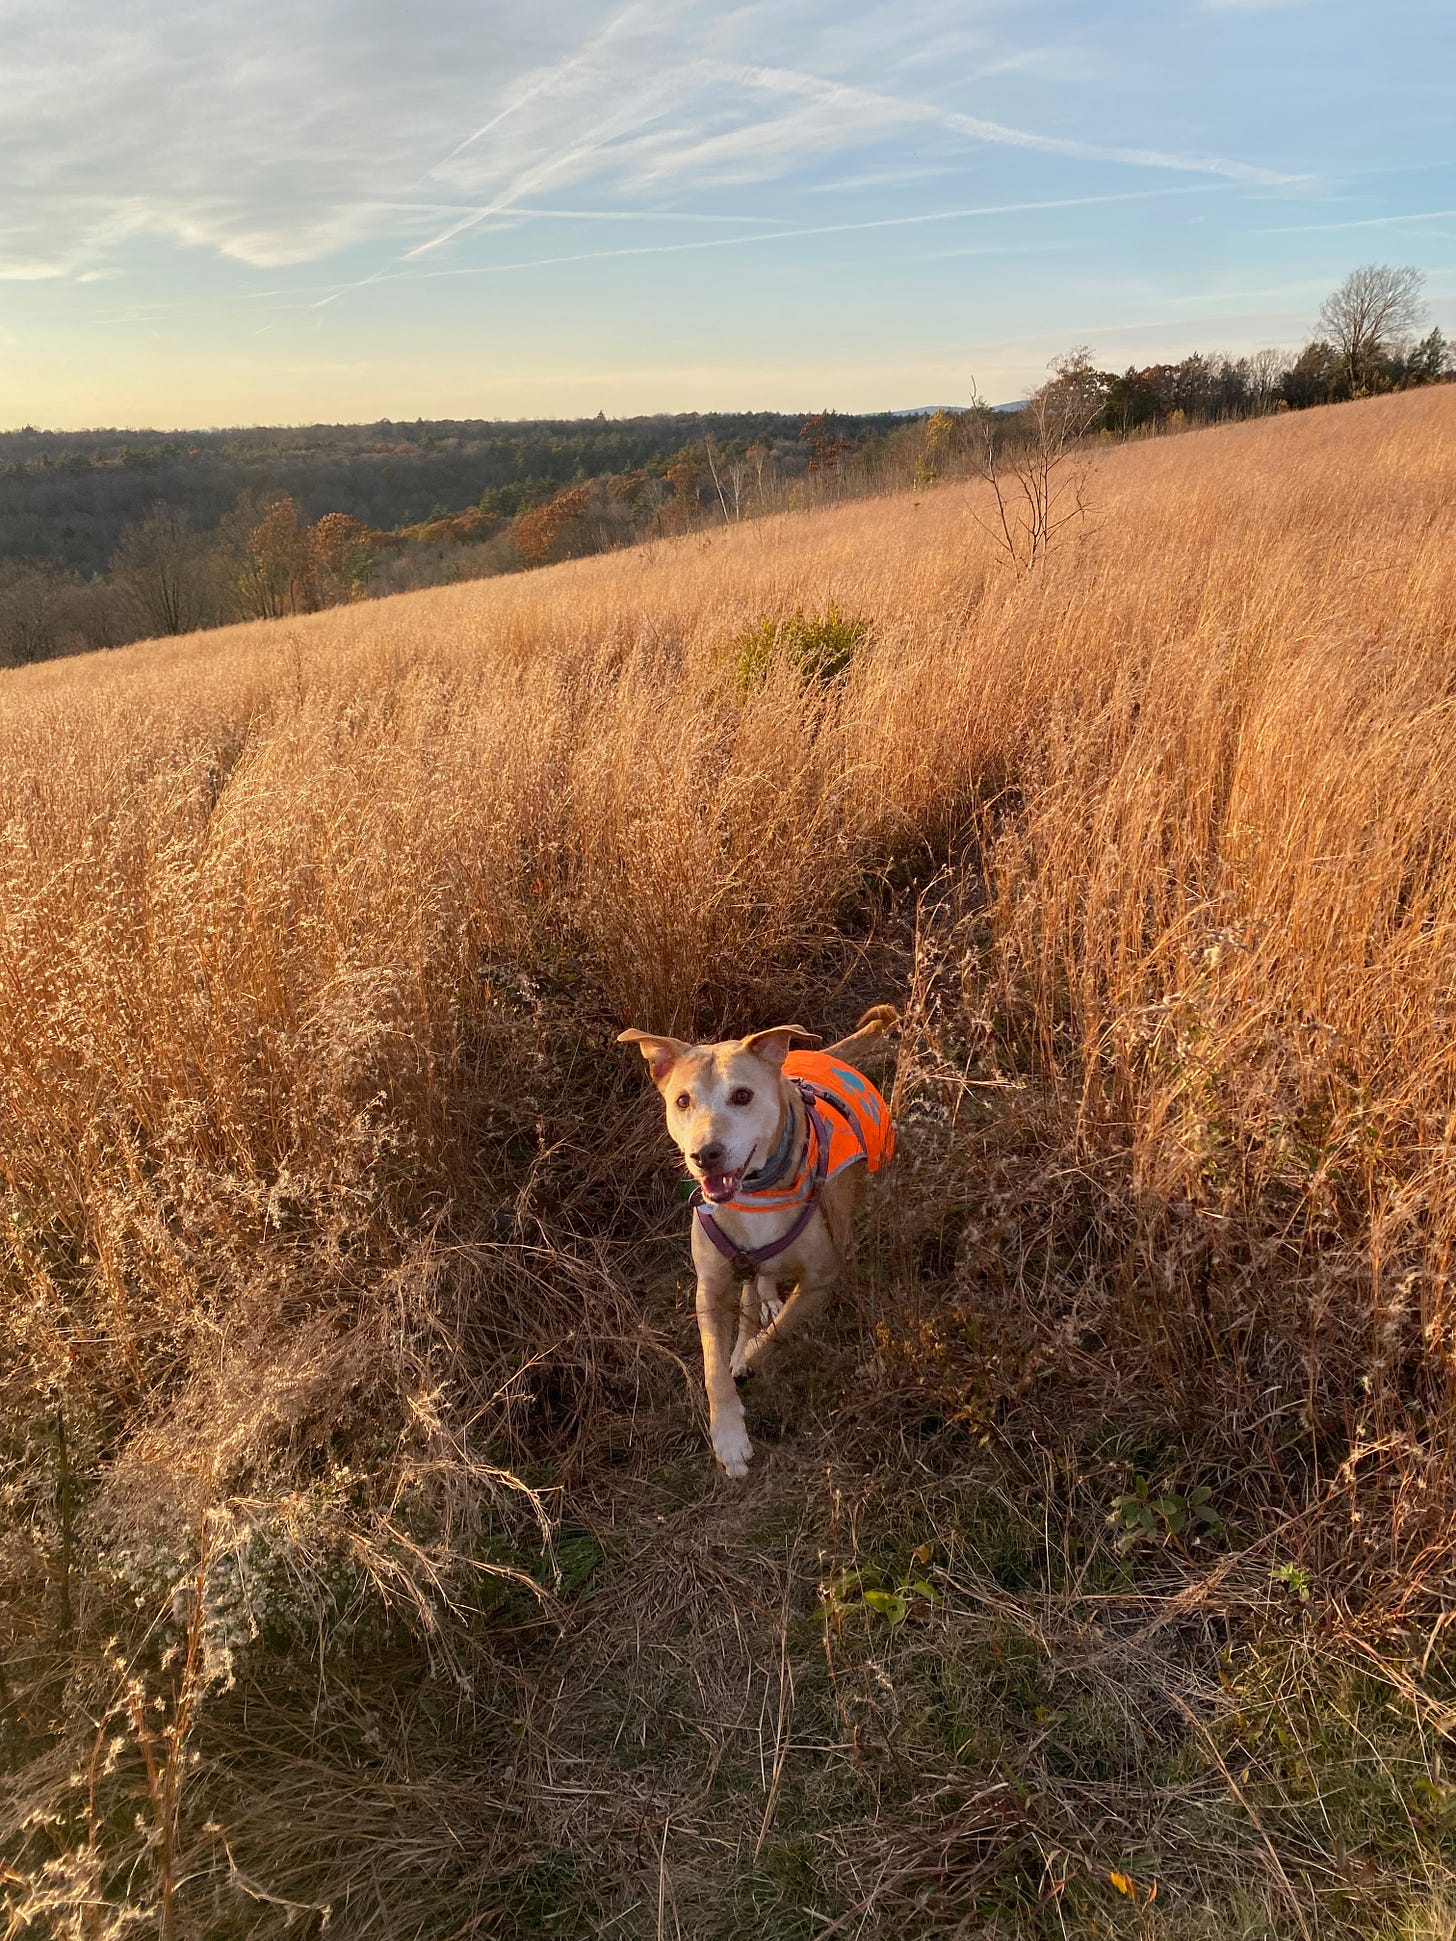 Nessa in mid-leap, running through a field of tall, golden grass on a ridgetop. Her ears are extended and she’s smiling. 